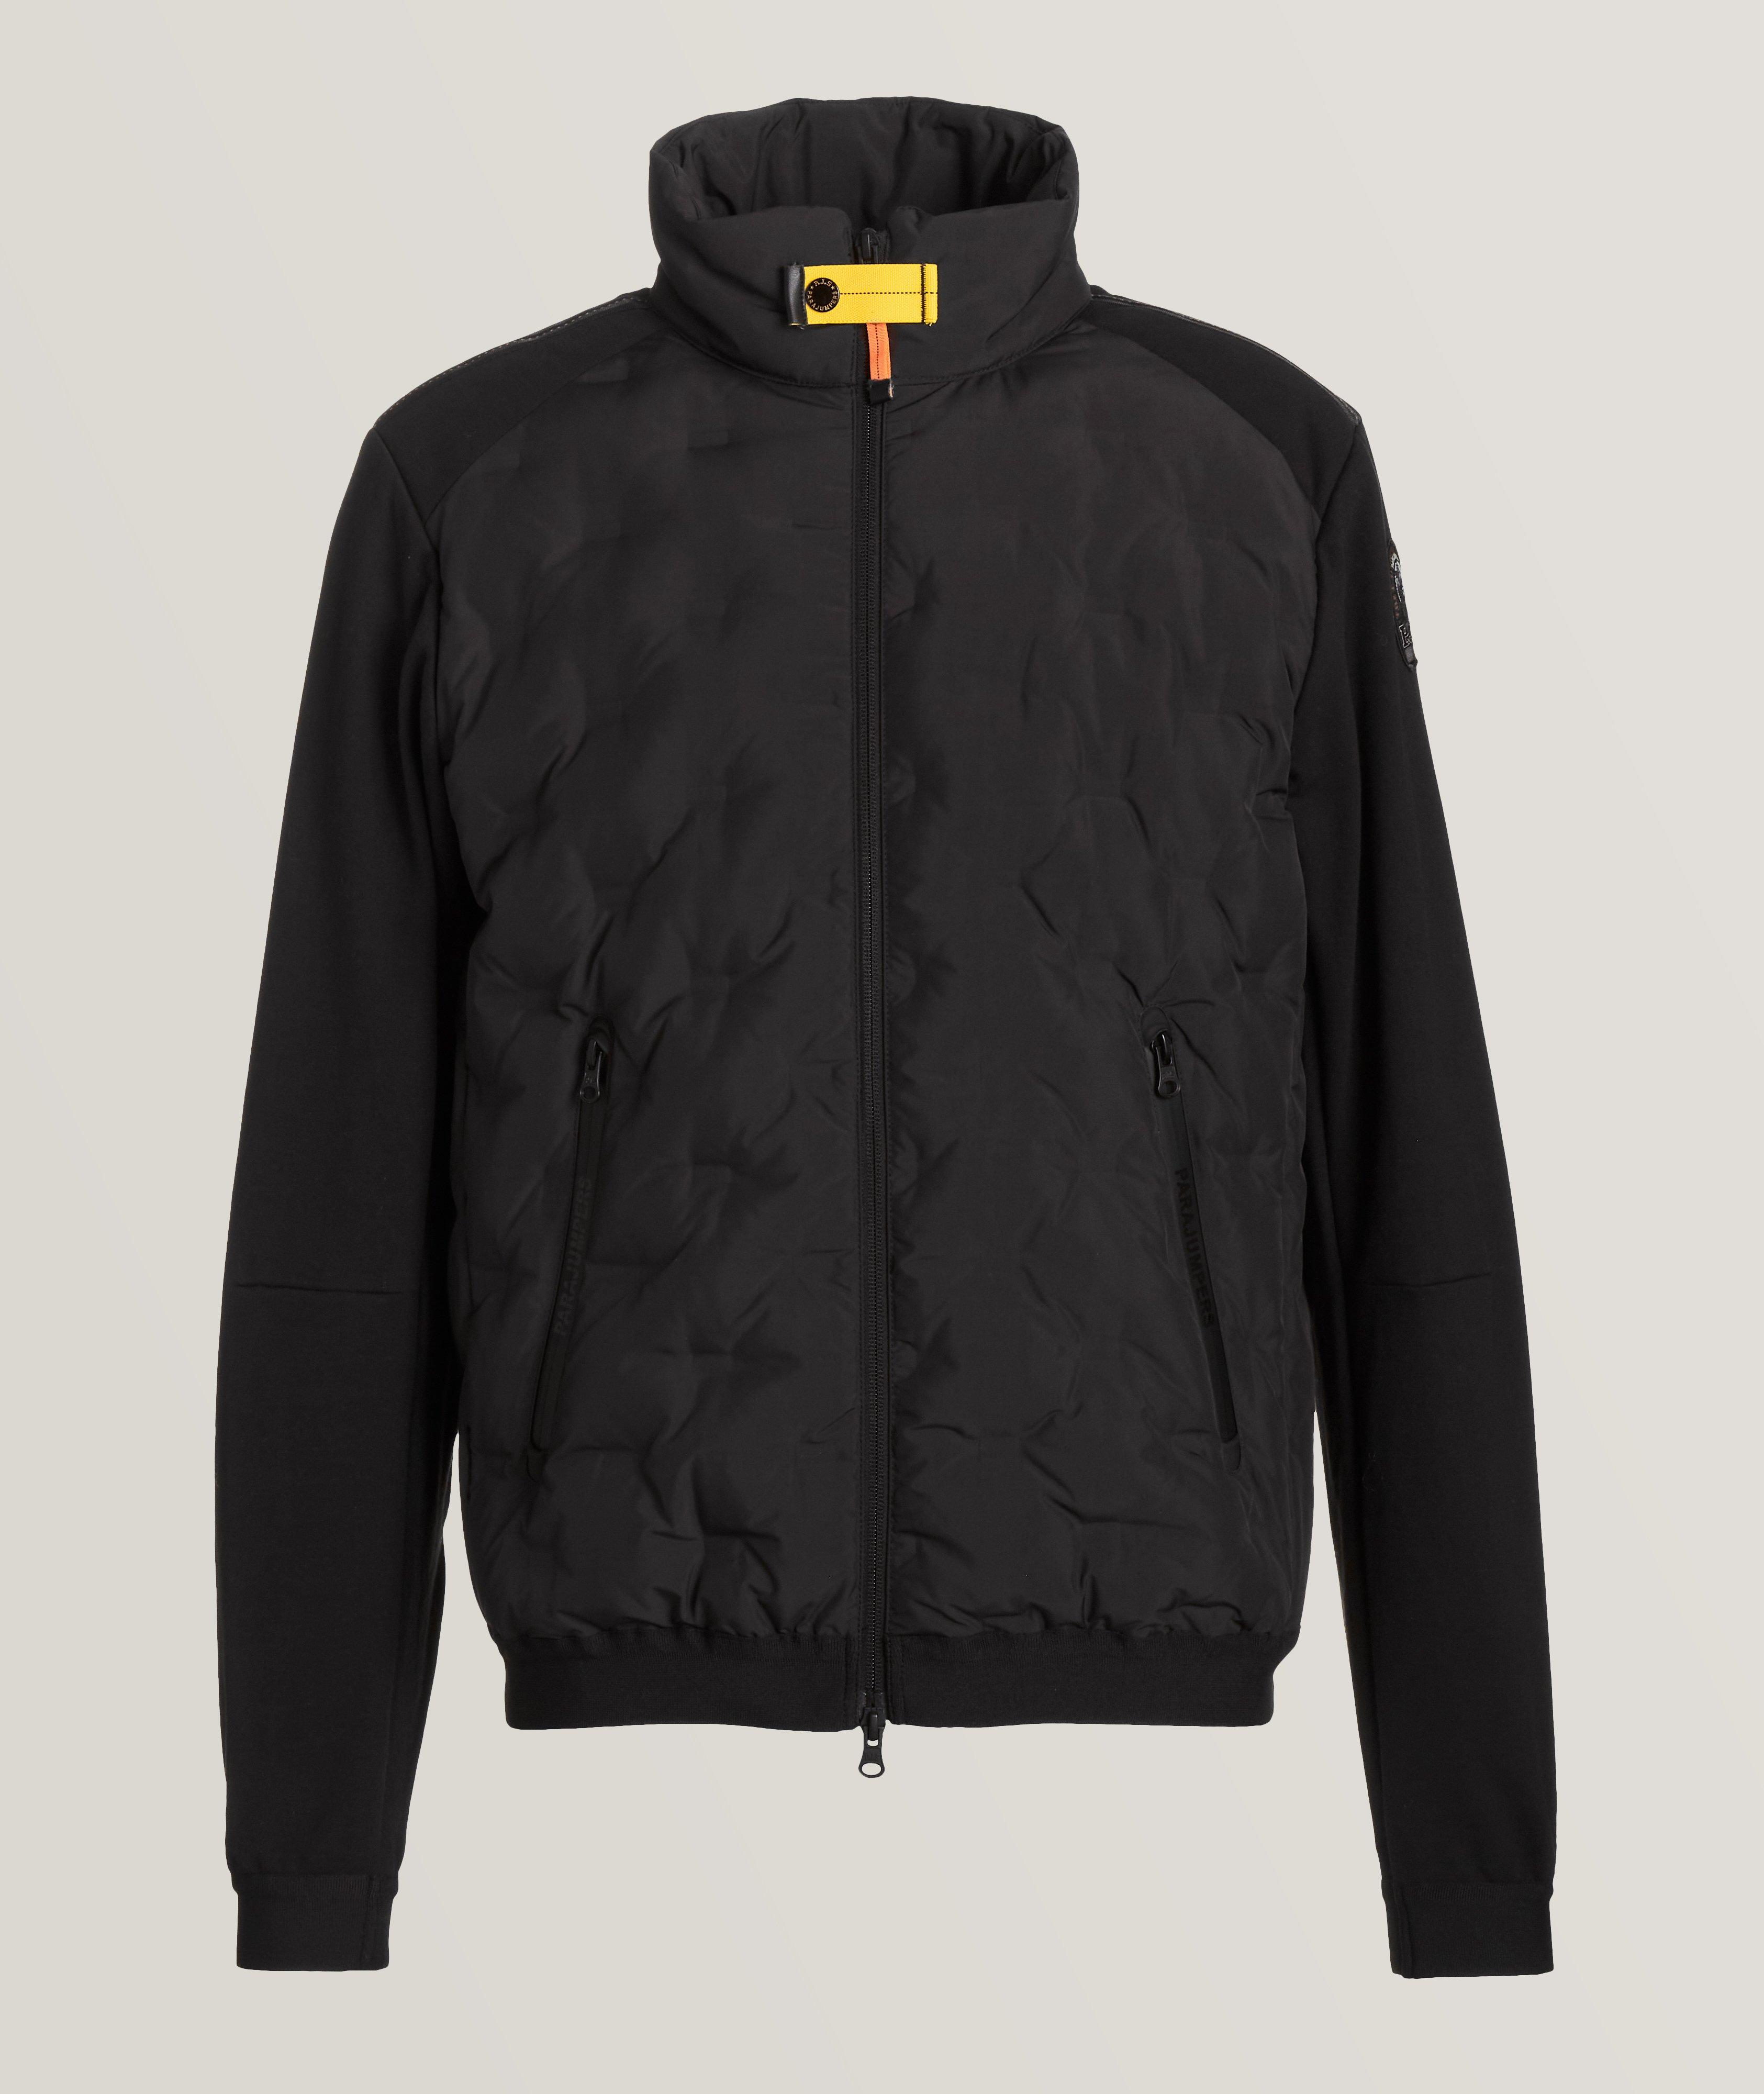 Taga Diamond Quilted Down Jacket image 0